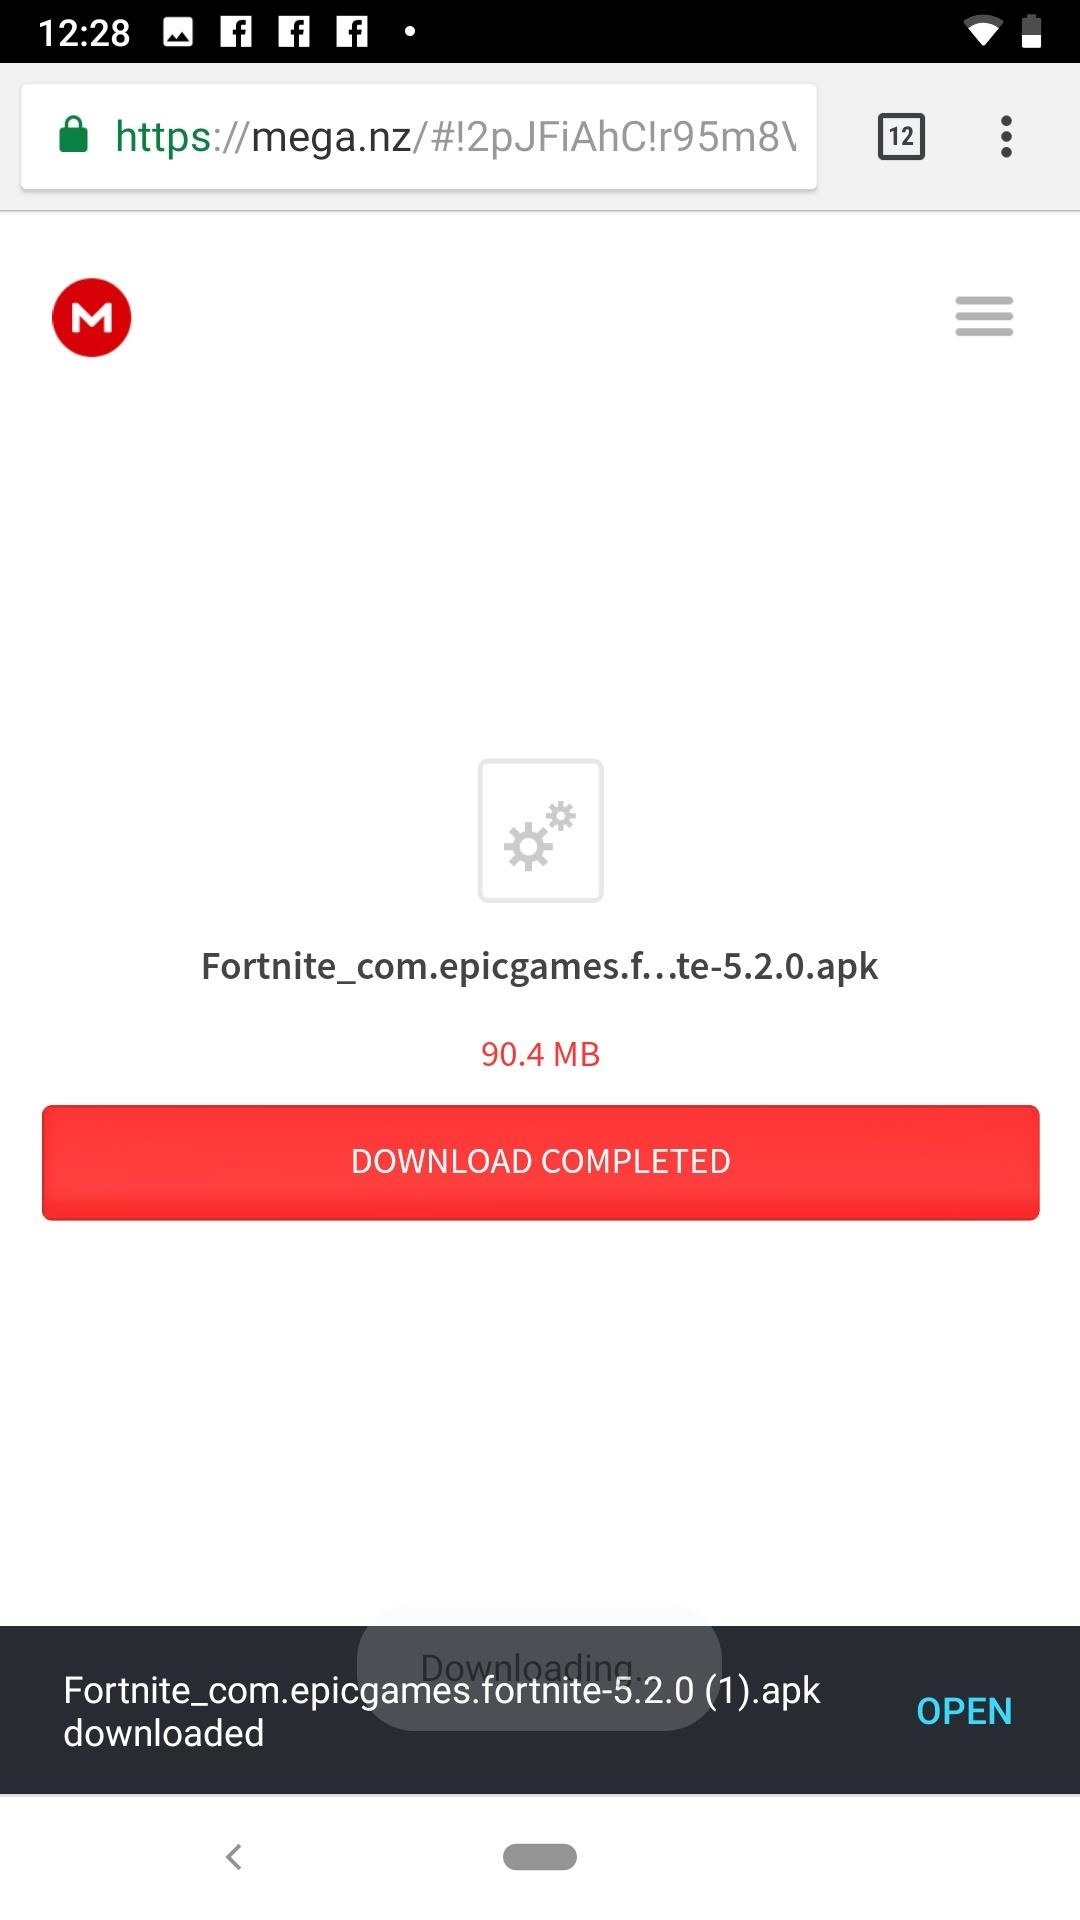 once the apk has been downloaded via your browser you can tap download at the bottom of the screen to download the file directly to your device - fortnite for android 70